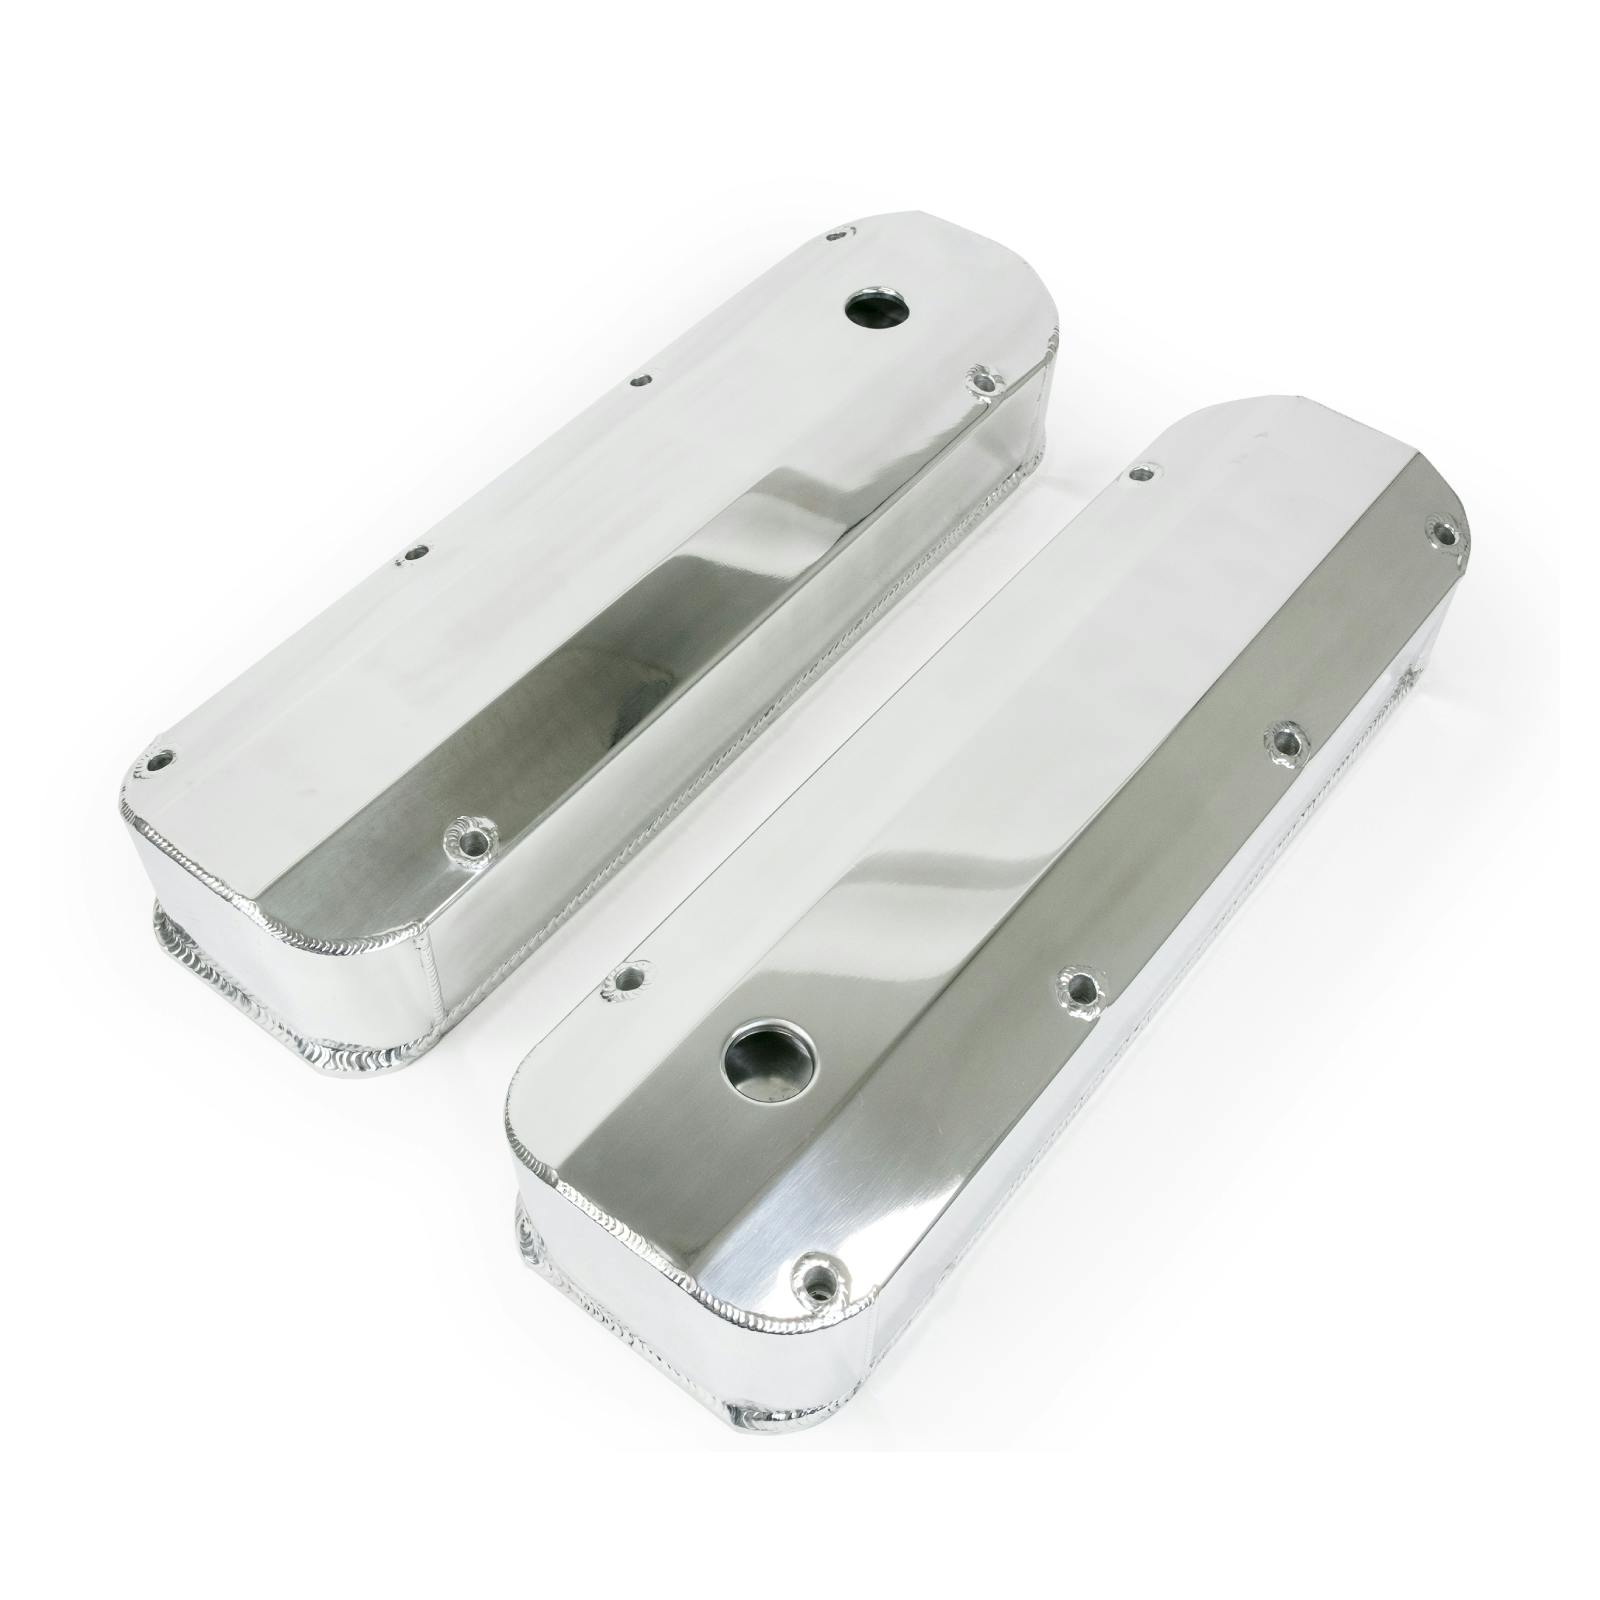 Top Street Performance JM8092-7CA Clear Anodized Tall Fabricated Valve Cover Long Bolt with Breather Hole 